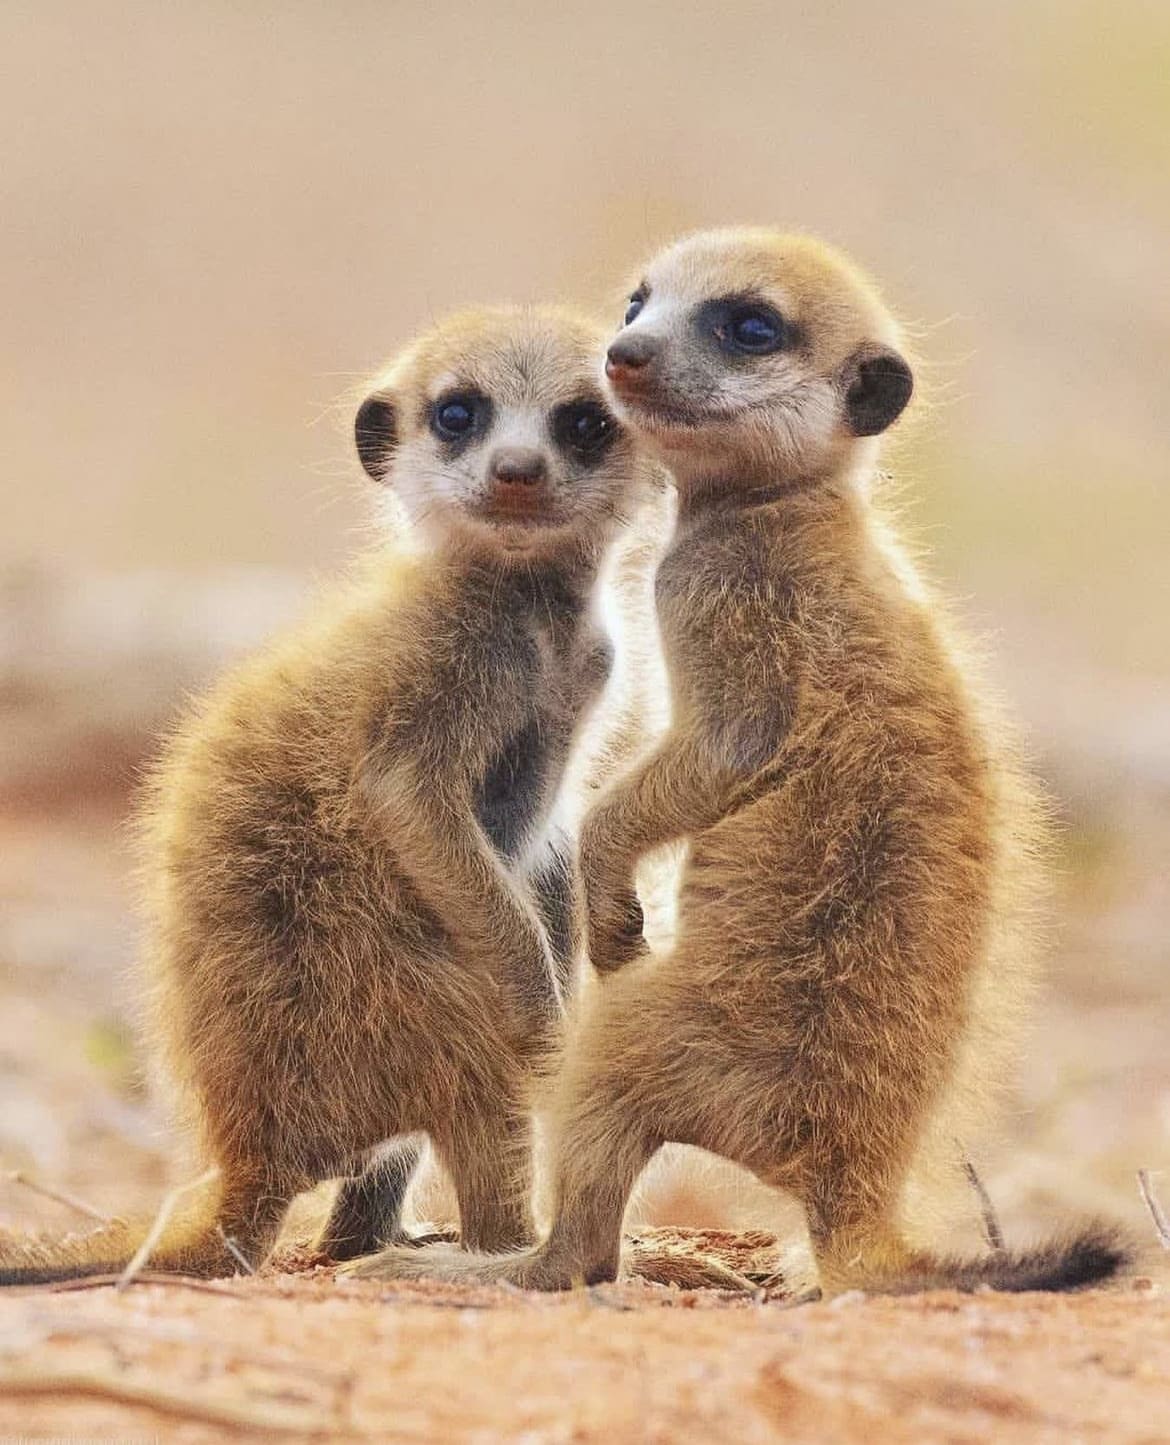 Meerkat pups posing perfectly for the camera